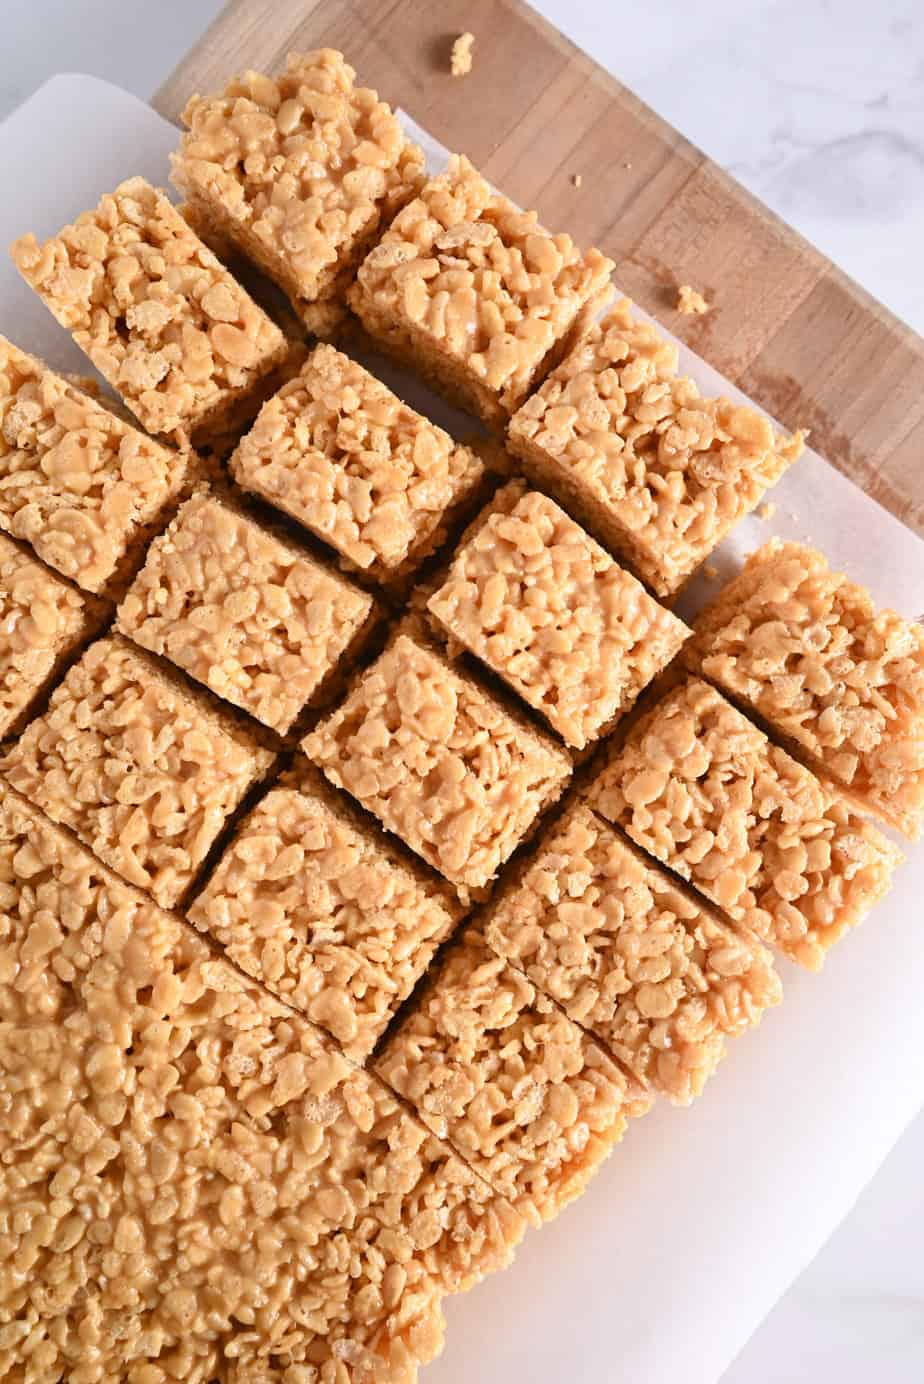 Slab of peanut butter rice krispie bars being sliced on a wooden cutting board.